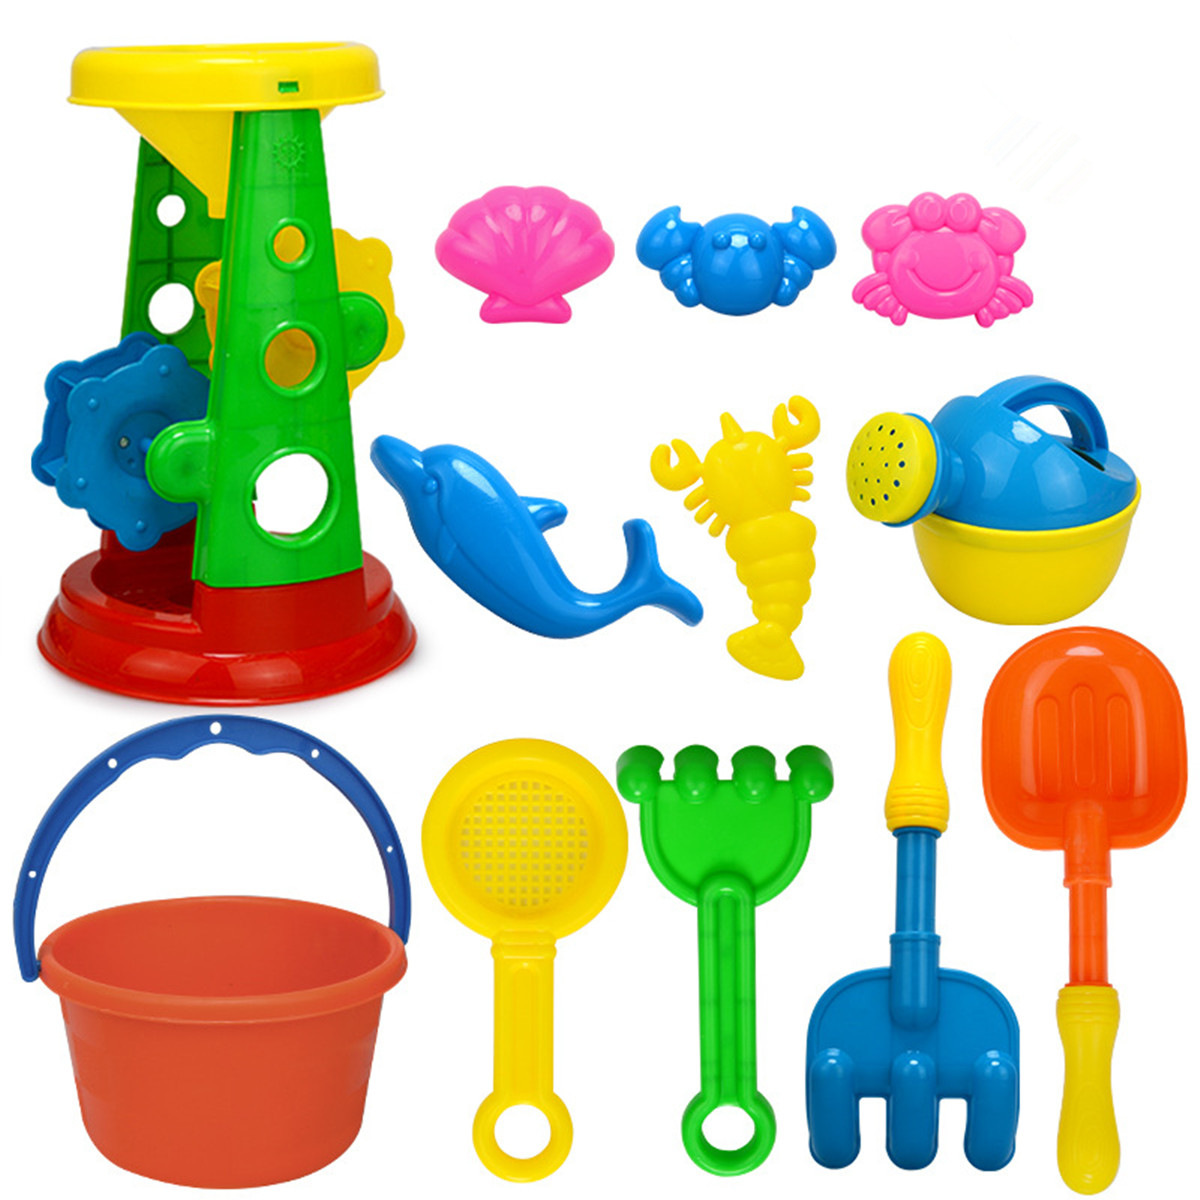 sand and water play set